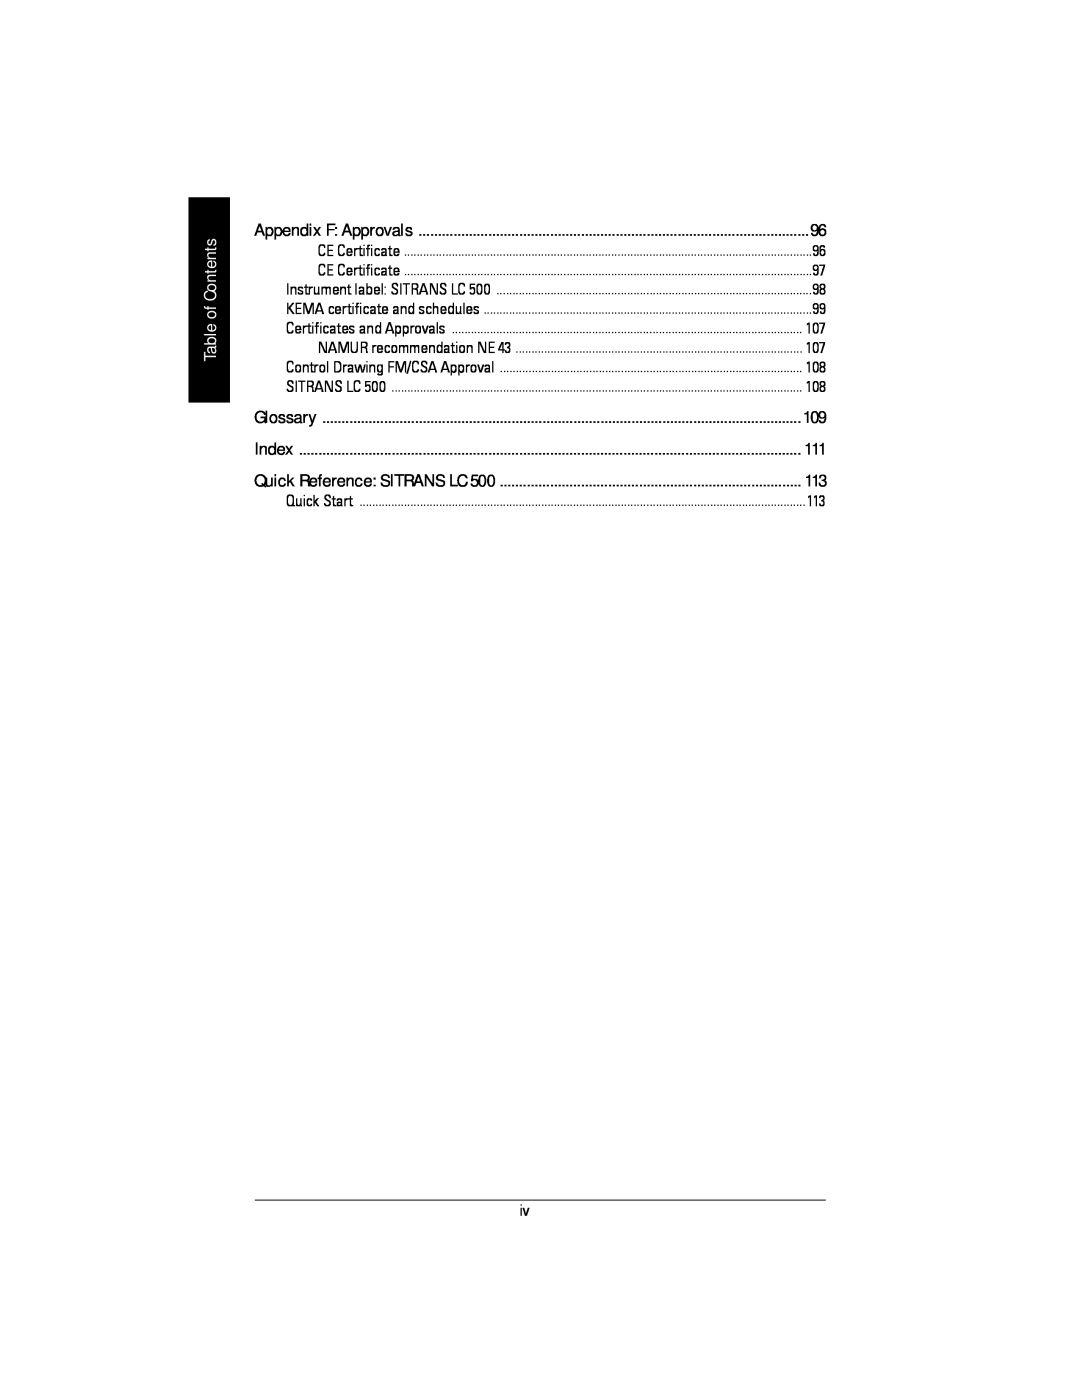 Siemens LC 500, Sitrans instruction manual Table of Contents, Quick Reference SITRANS LC, Appendix F Approvals, Glossary 